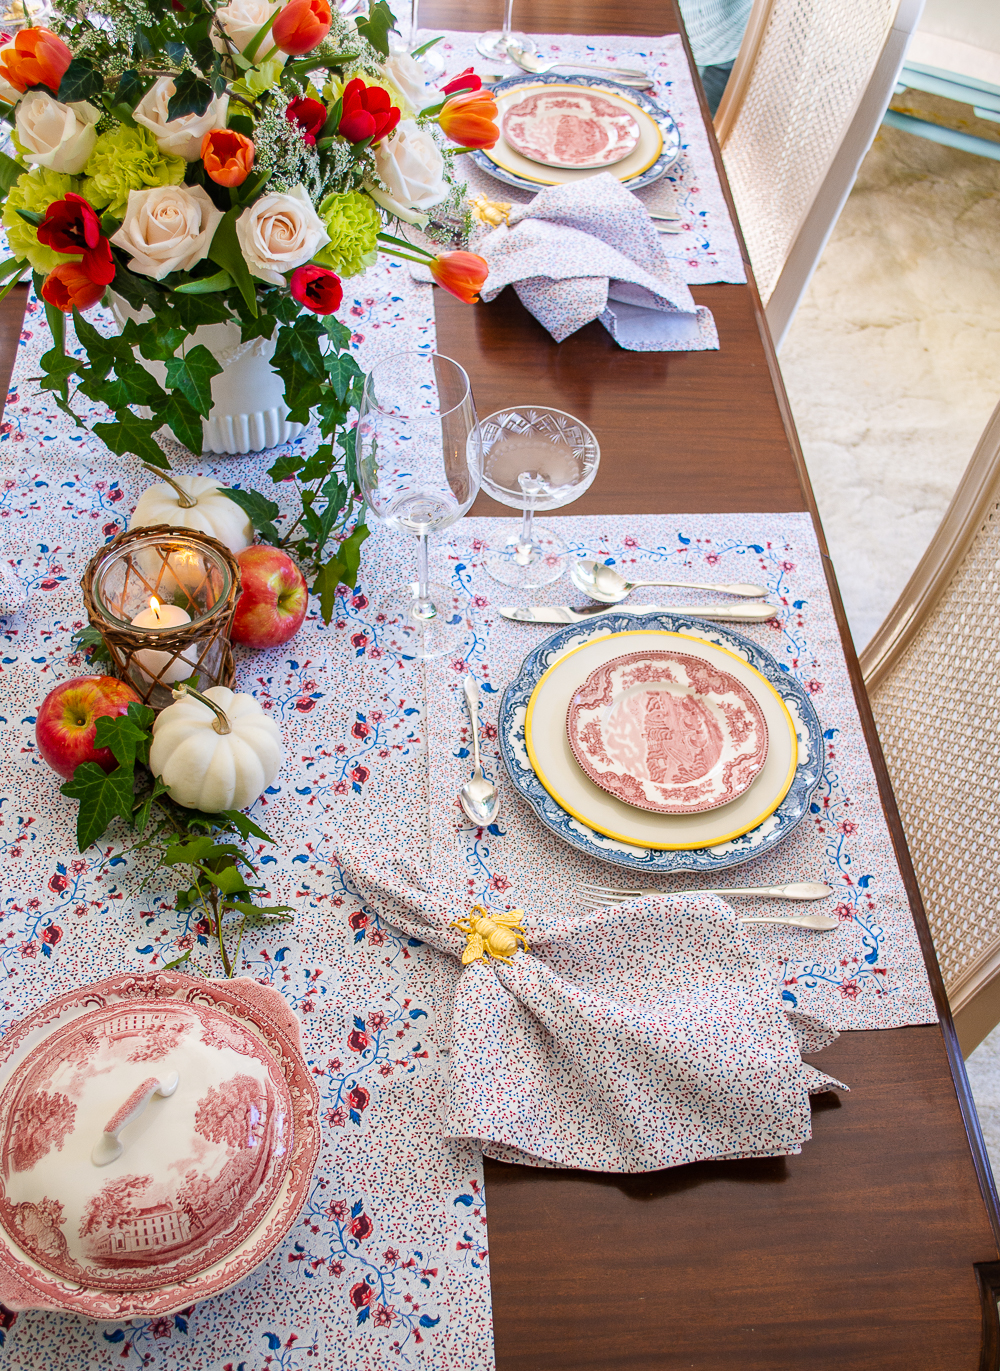 Play with mixing textures and sheens on your tablescapes to practice layering